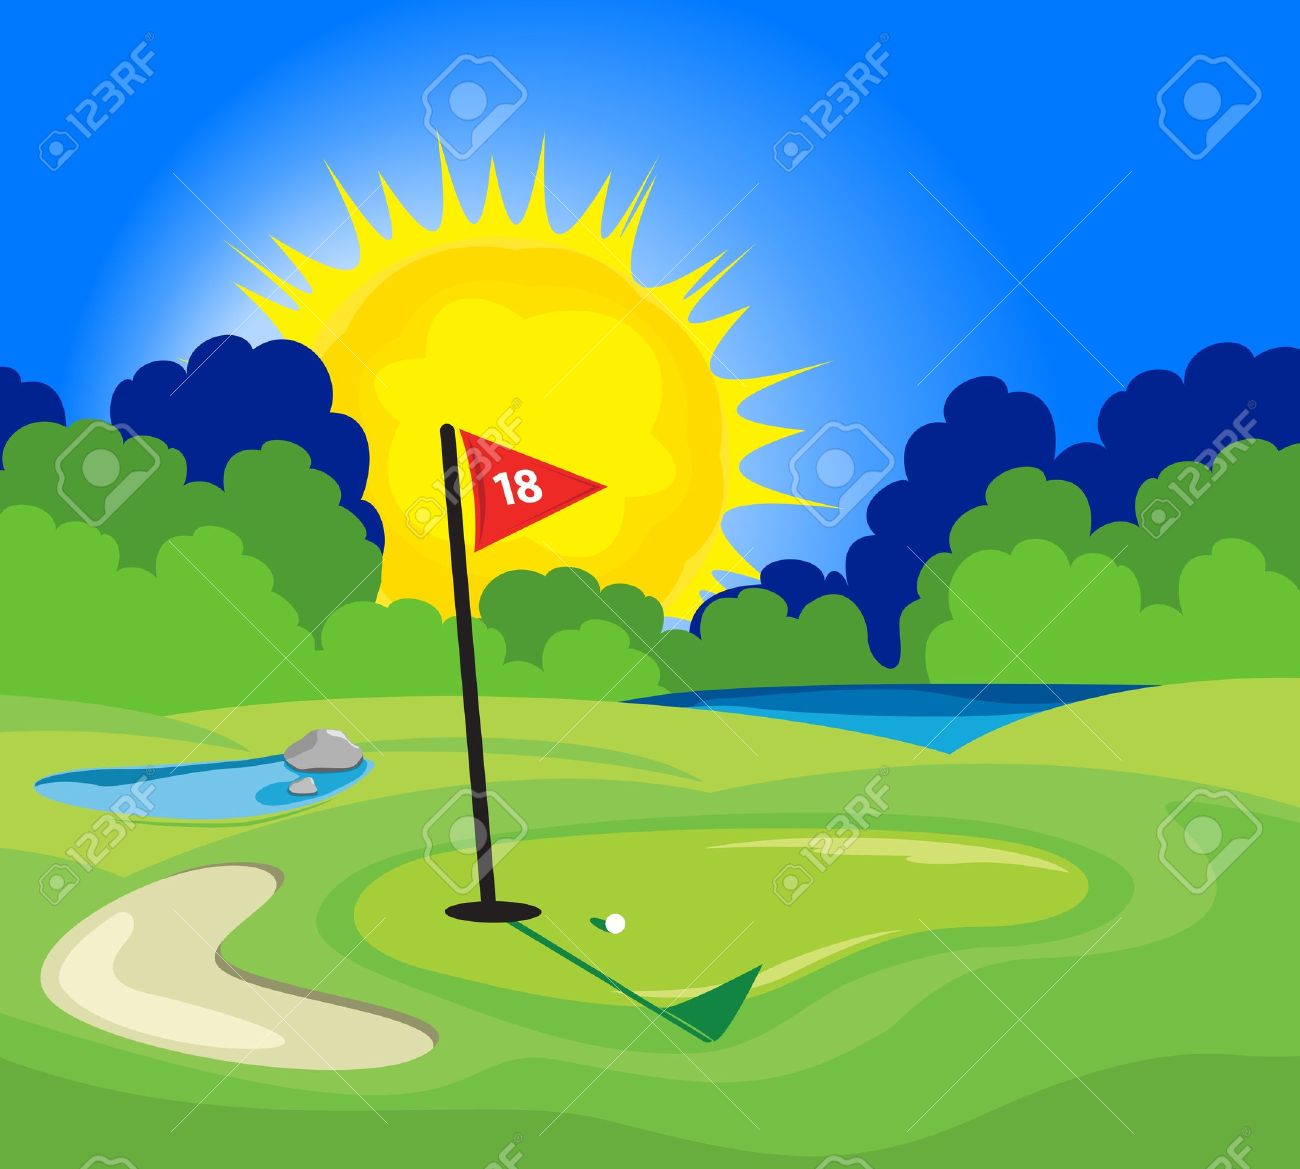 Golf Course Clipart Free Download Clip Art.